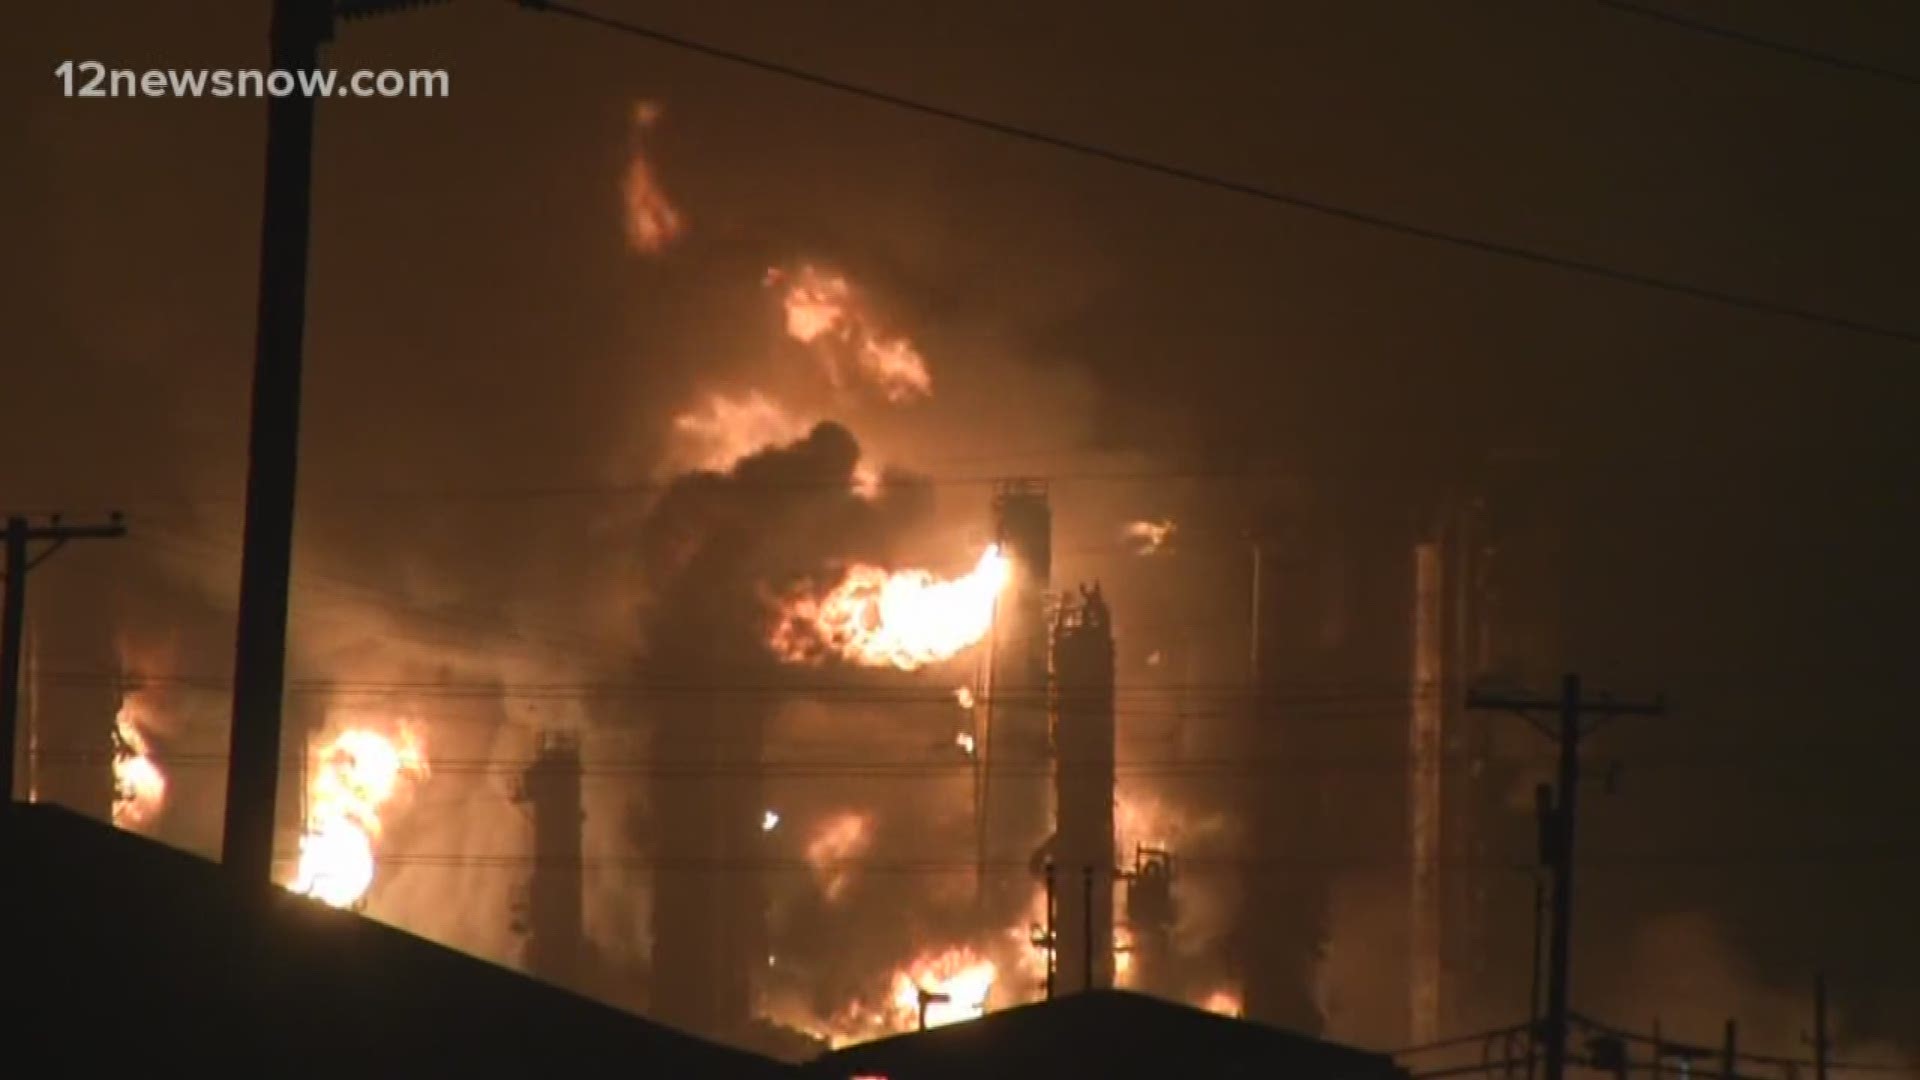 The layoffs come months after two major explosions at the Port Neches plant.